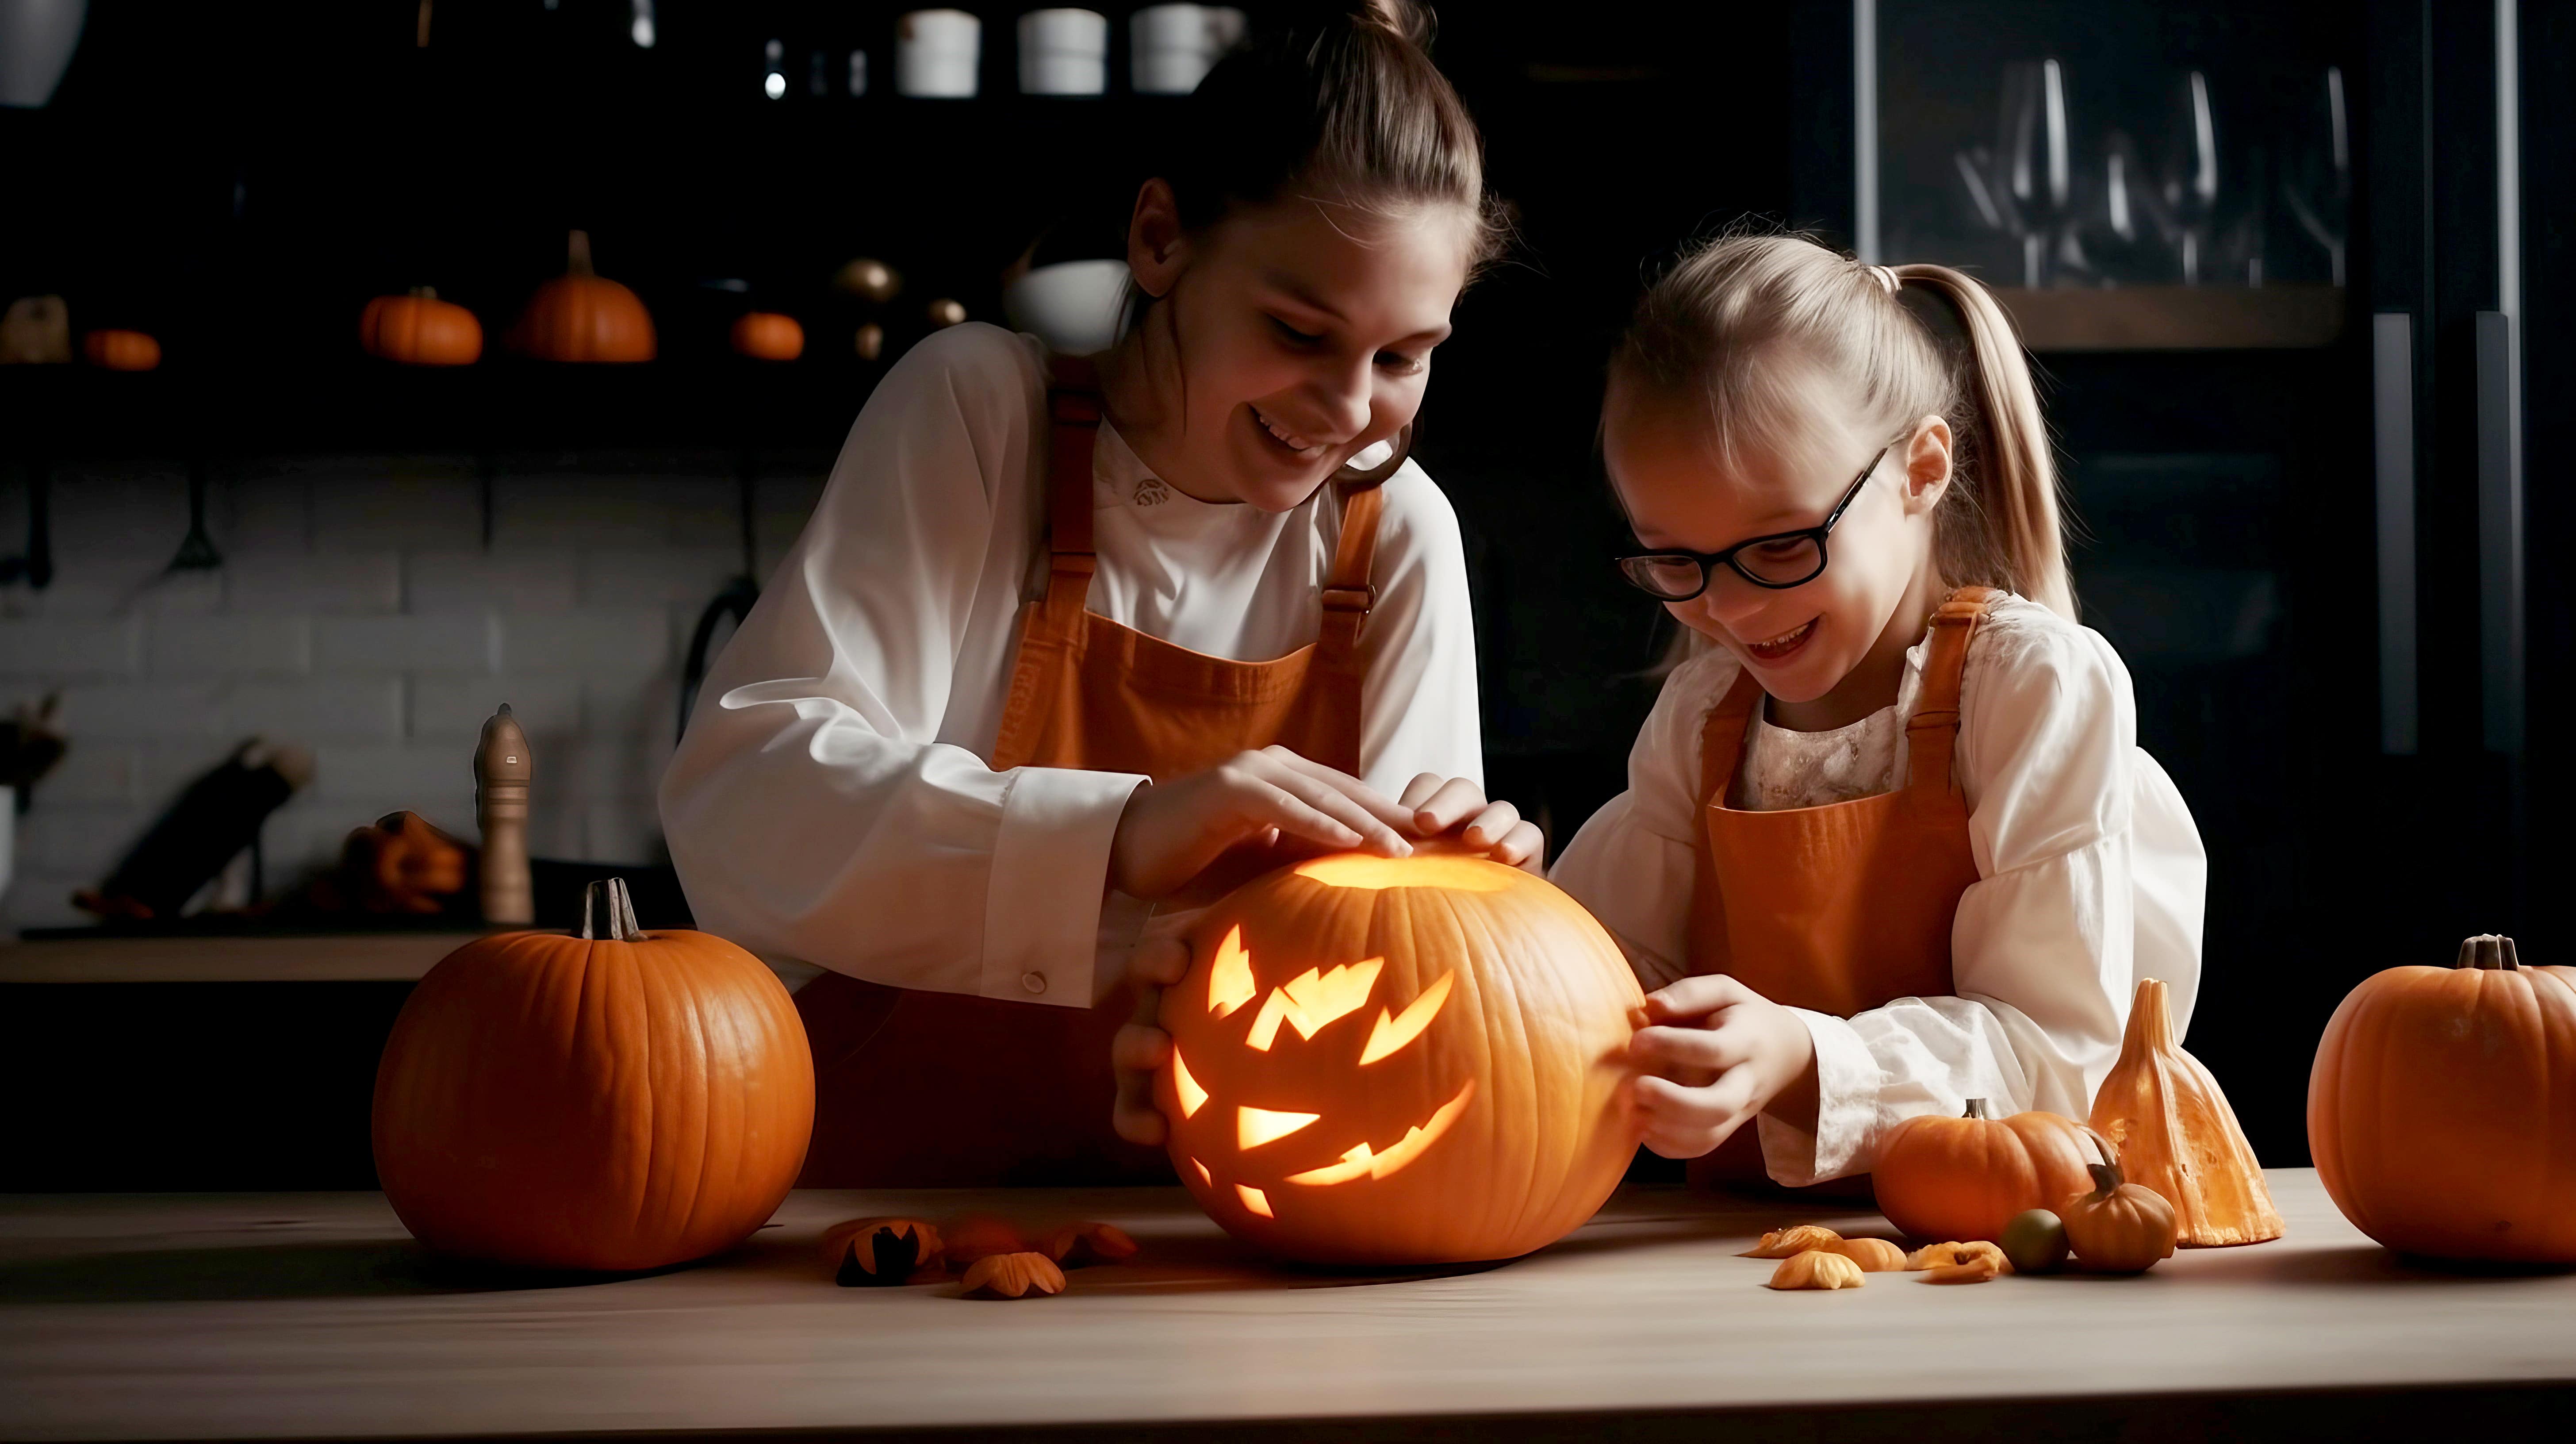 A mum and daughter lighting the candle in their pumpkin after carving it. Both are wearing matching orange aprons.